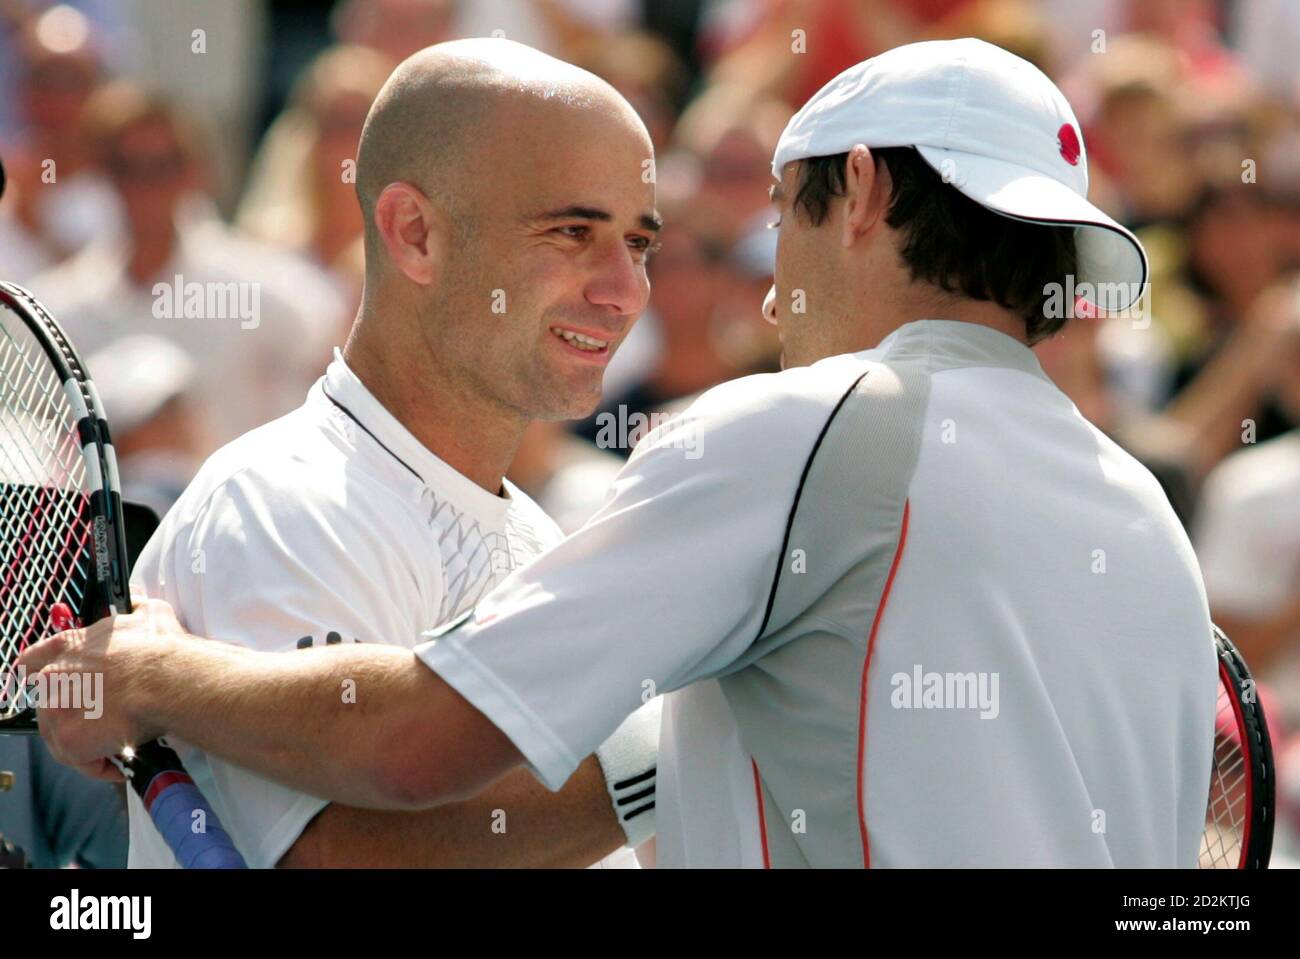 Andre Agassi (L) of the U.S. congratulates Germany's Benjamin Becker on his  win at the U.S. Open tennis tournament in New York September 3, 2006. Agassi  was playing in his last U.S.